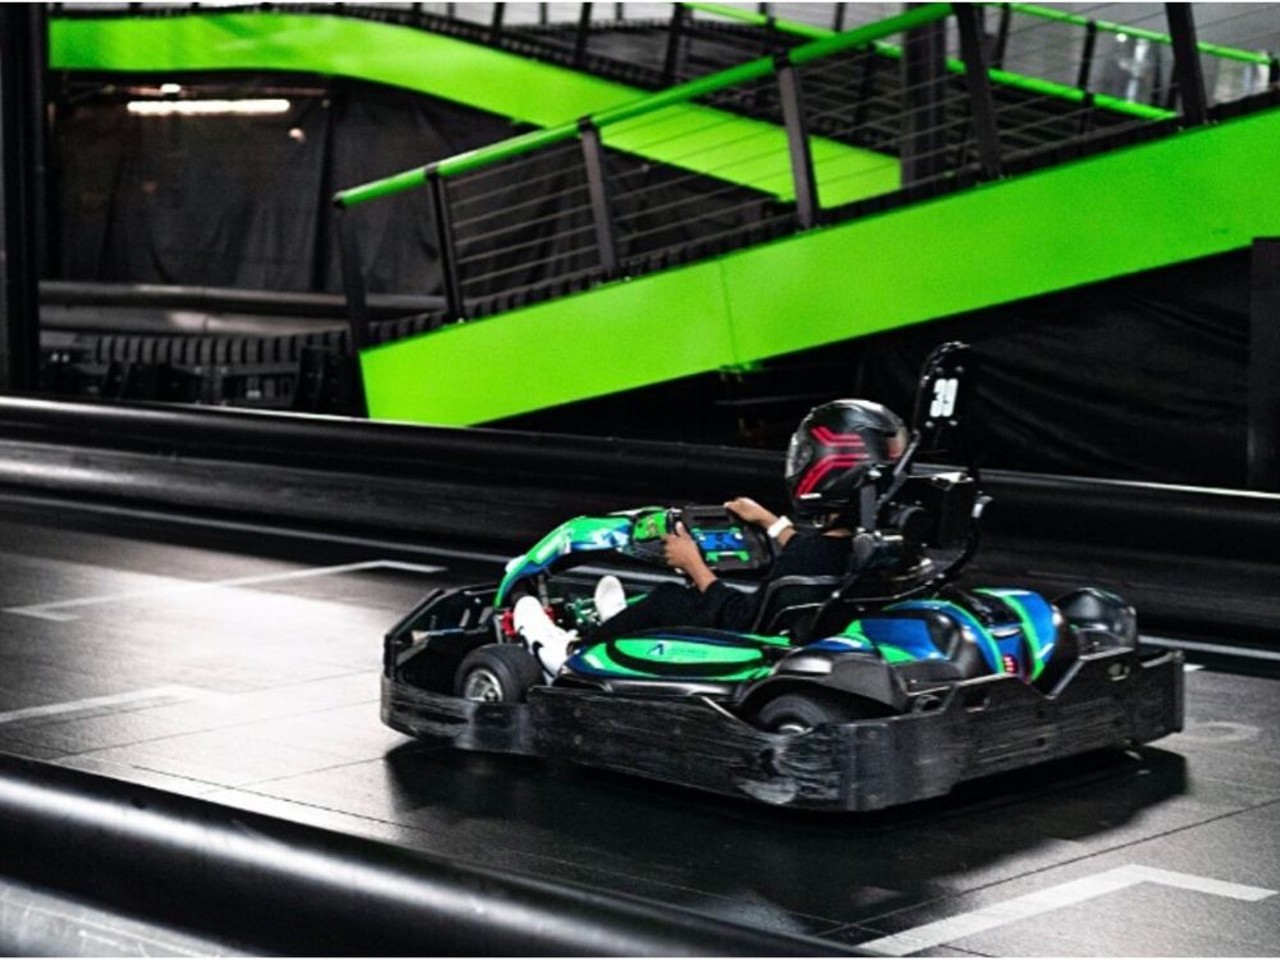 Race your friends at Andretti Indoor Karting & Games
5527 N. Loop 1604 W., (210) 469-0700, andrettikarting.com
Andretti’s indoor go-kart track promises an adrenaline rush! The entertainment center — which also offers laser tag, arcade games, a VR experience and more — is open until midnight Sunday-Thursday and 1 a.m. Friday-Saturday.